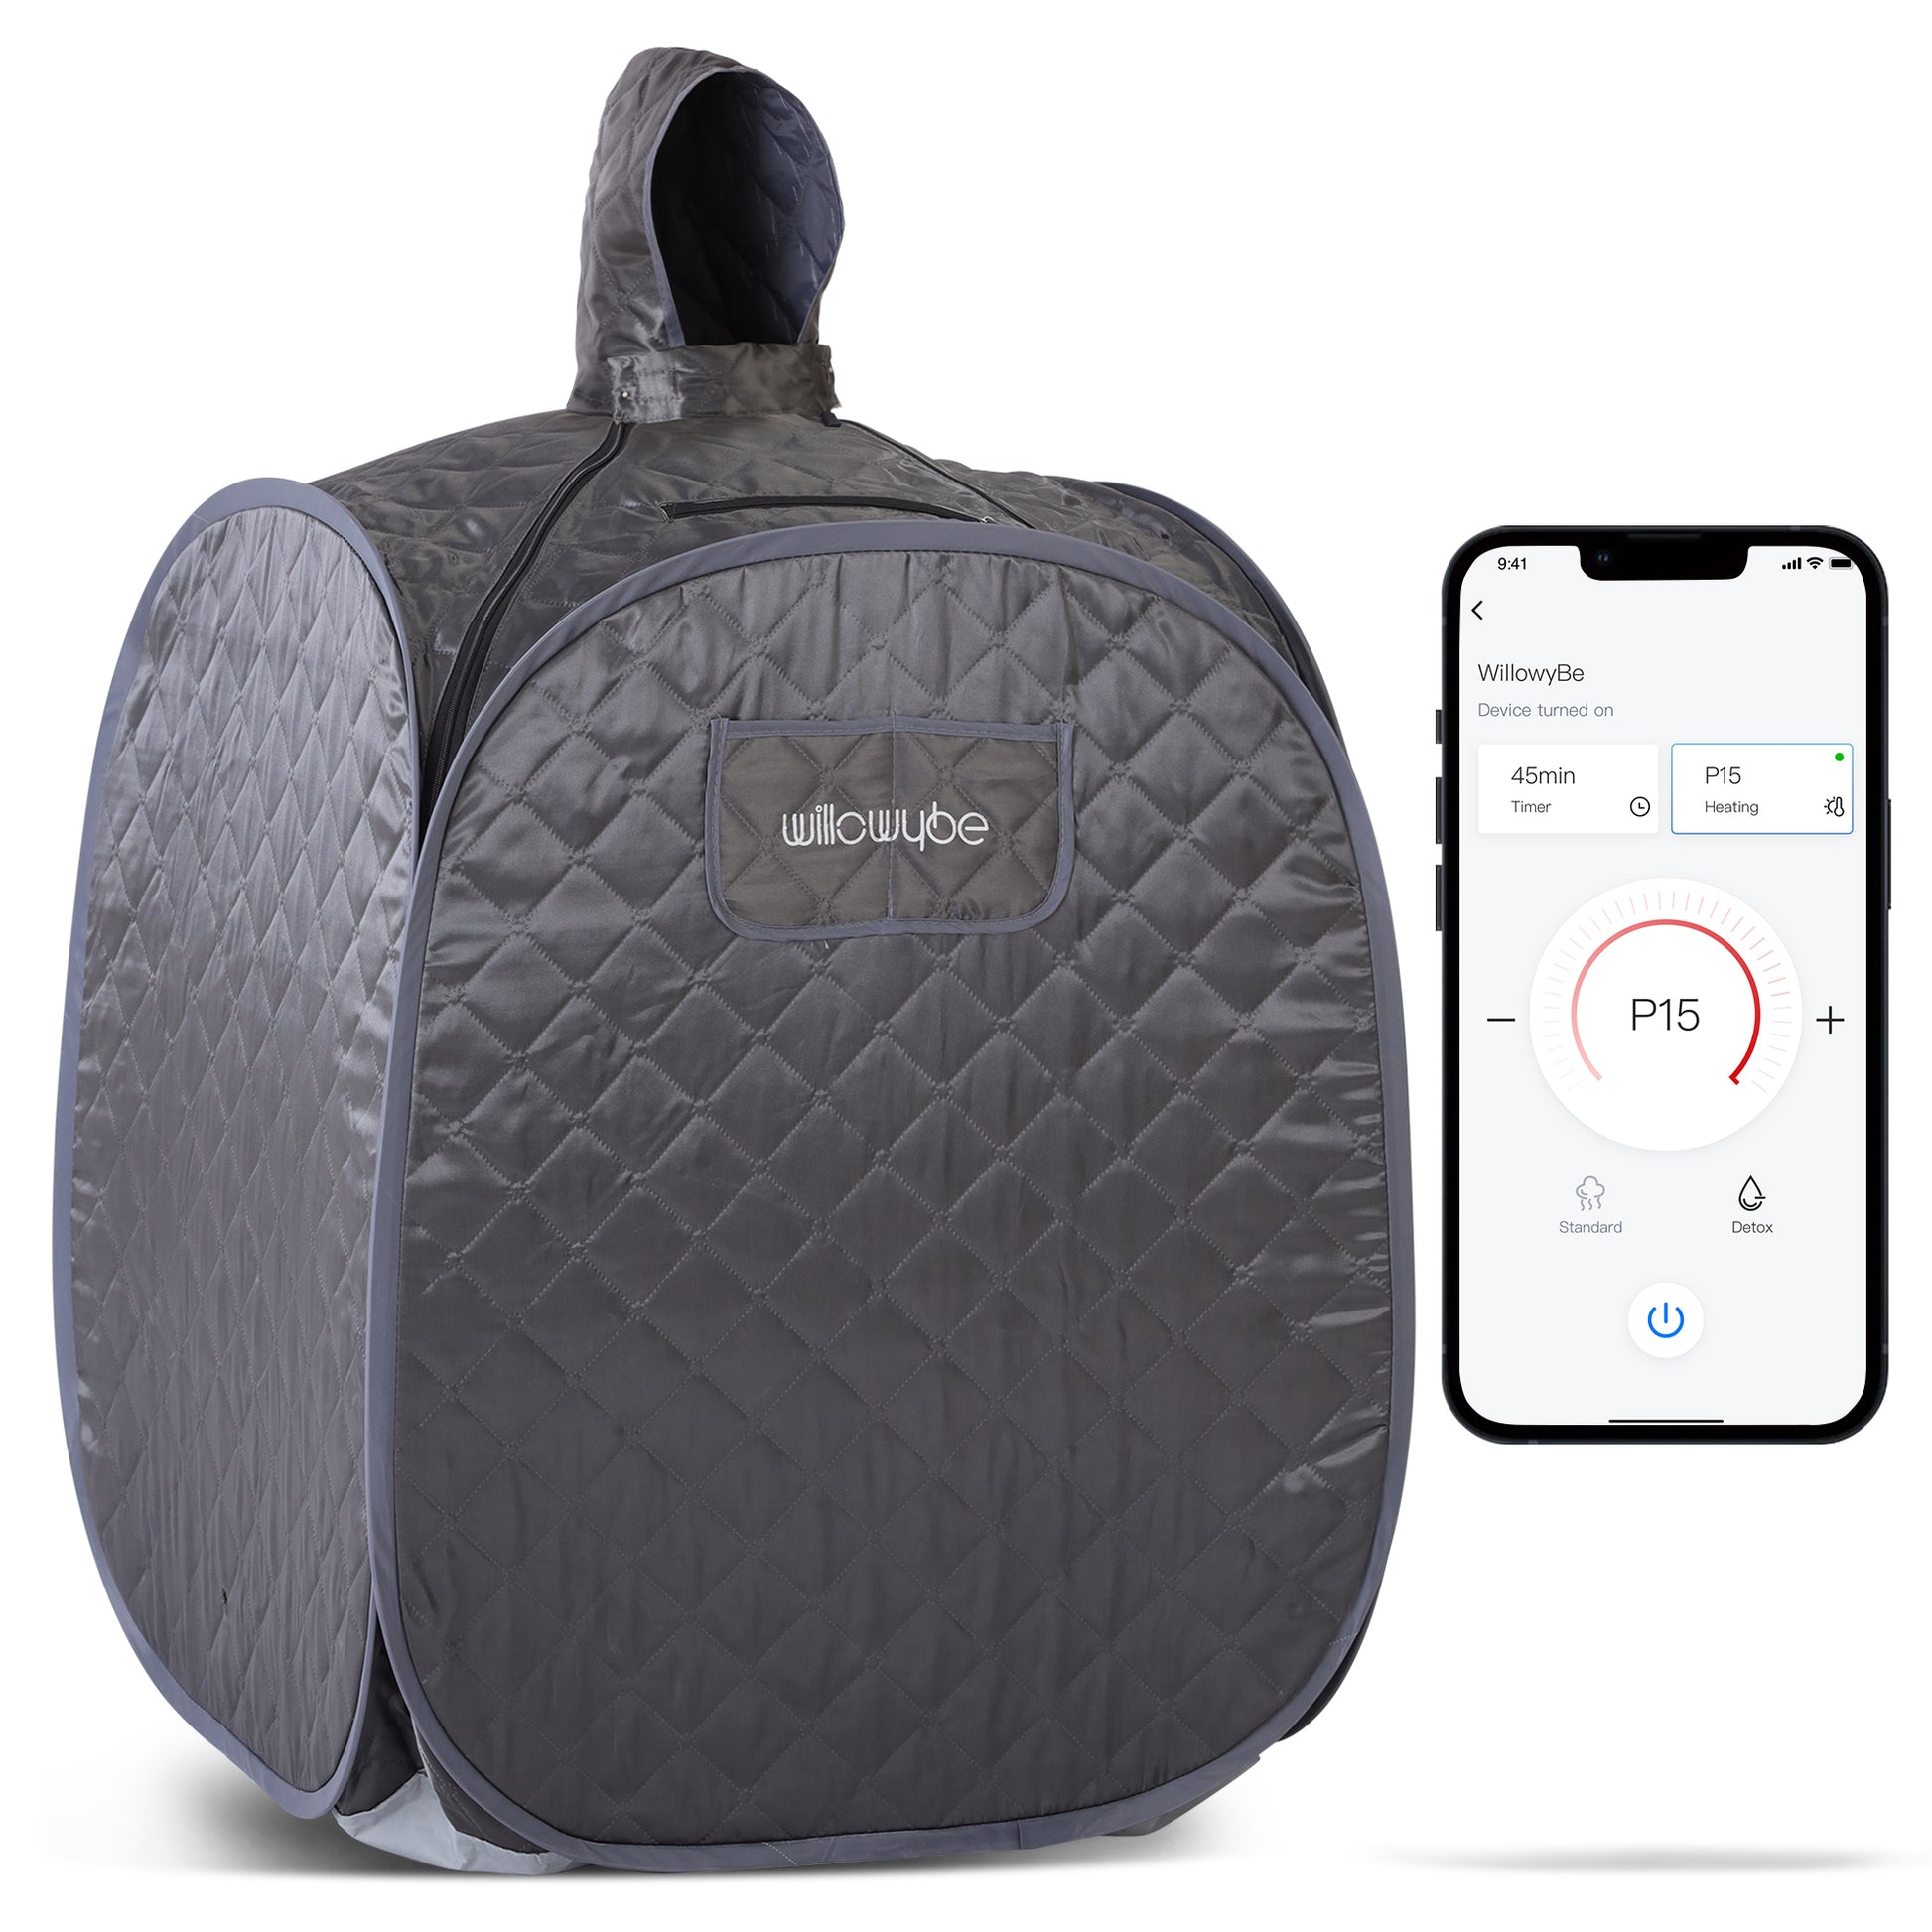 Portable Personal Steam Sauna with APPs | Willowybe